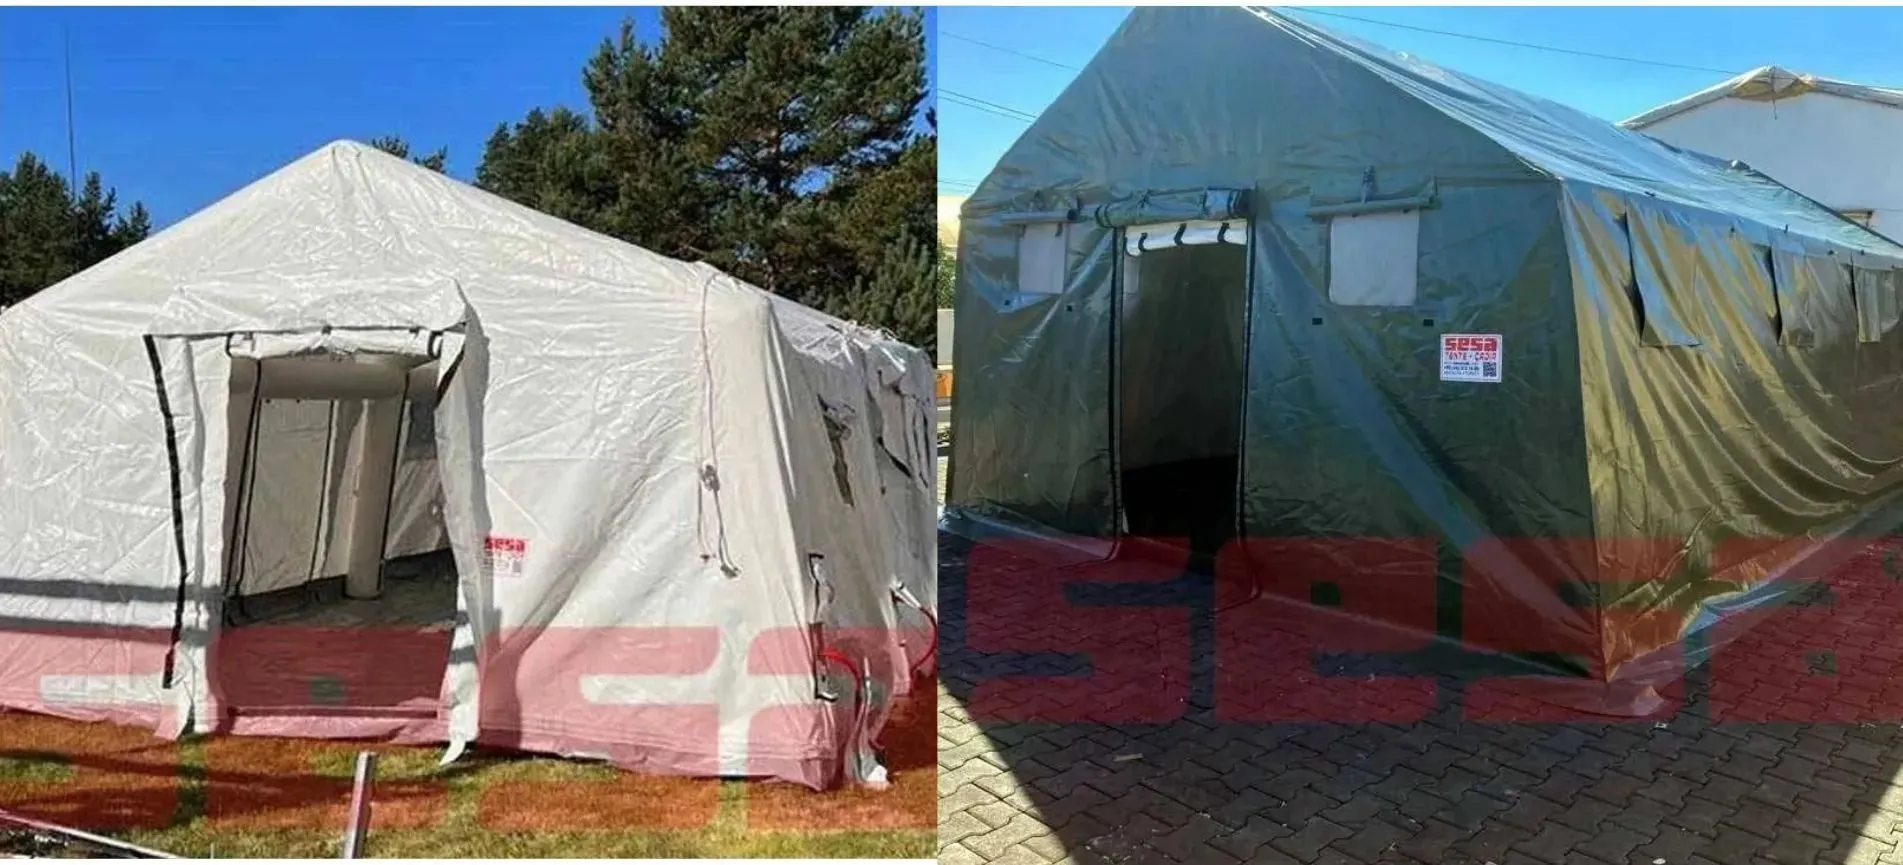 Military Tent - Inflatable Tent Models